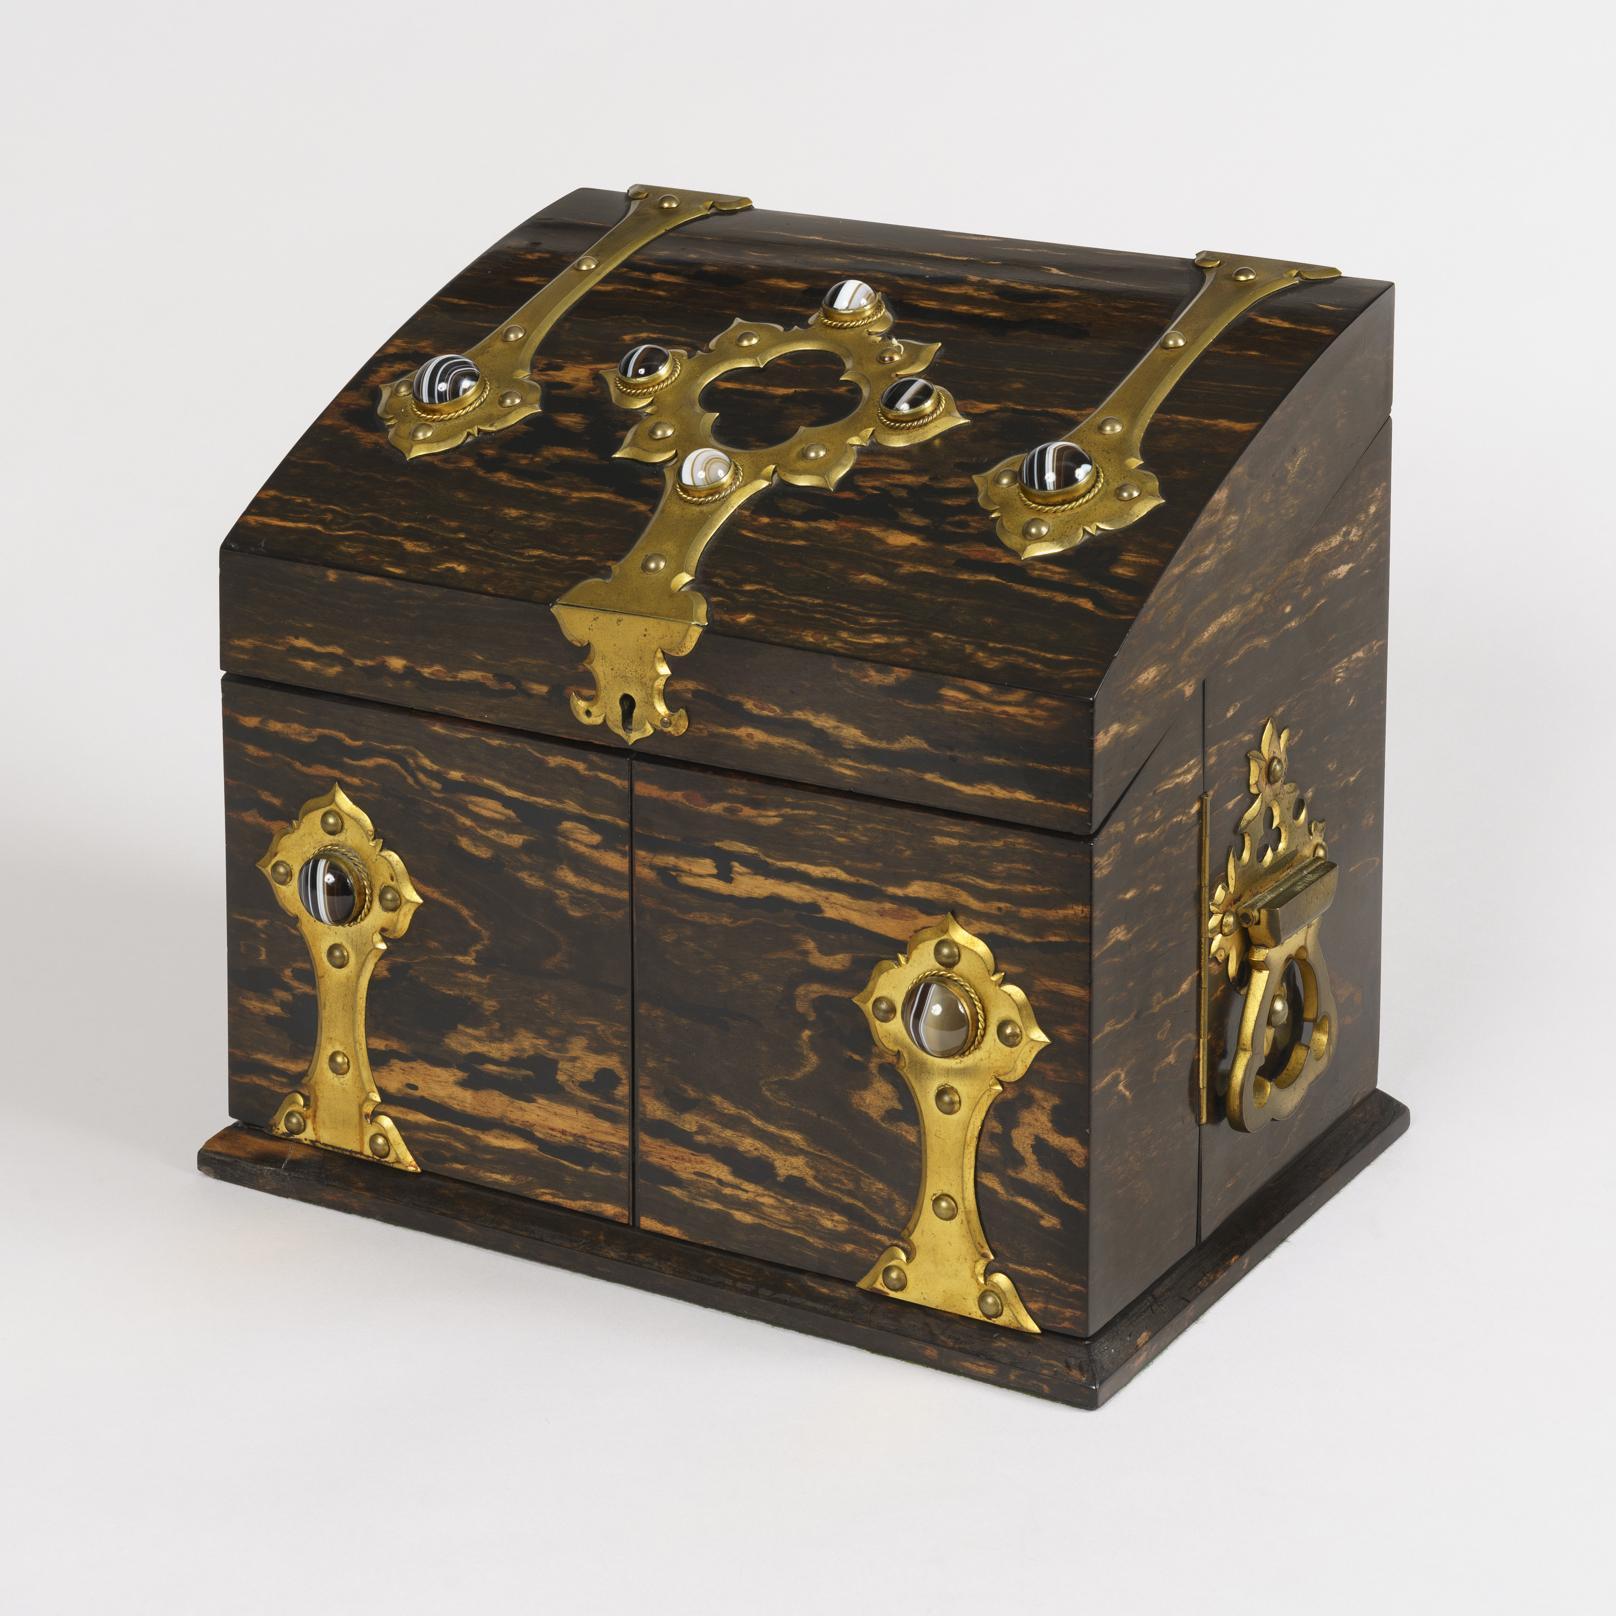 A Fine Drinks Box retailed by Spiers of Oxford.

Constructed in coromandel, dressed with gothic style bronze handles, and cabochon Tiger's Eye gemstones to the top; opening to reveal two hinged side wings each housing two wine glasses, with the